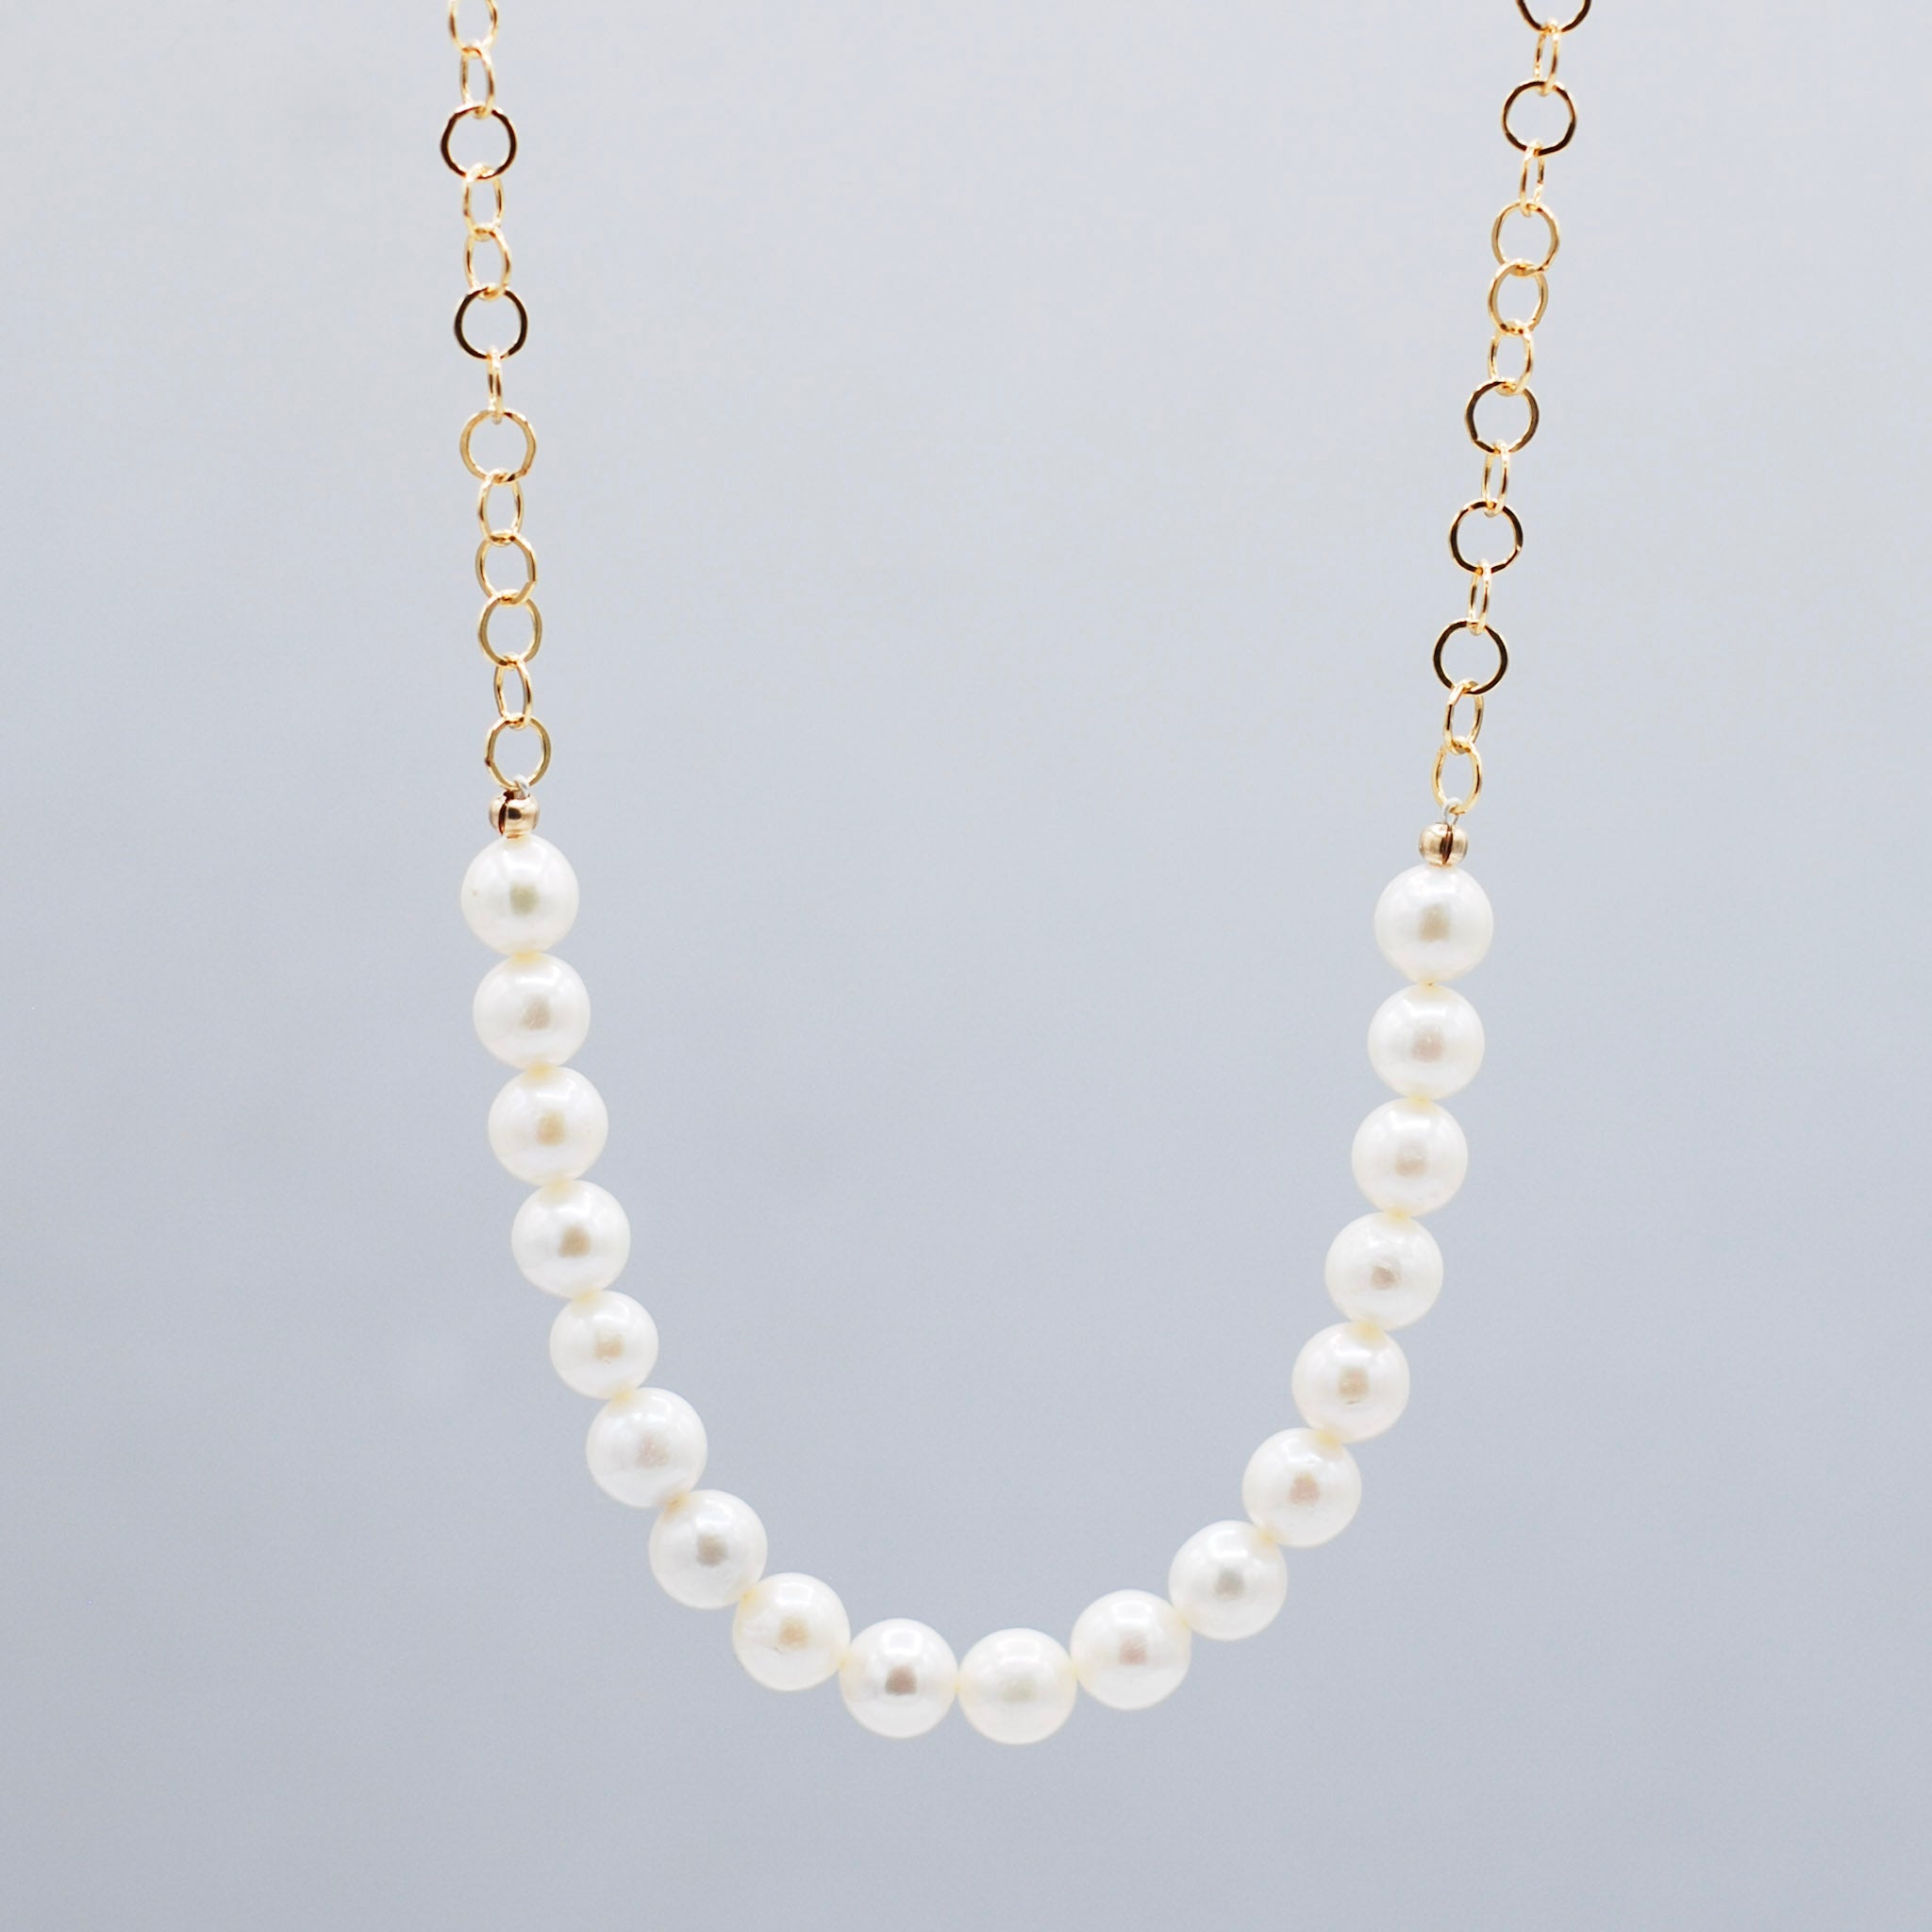 Freshwater Pearl & 14k Gold Filled Necklace - Jewel Ya